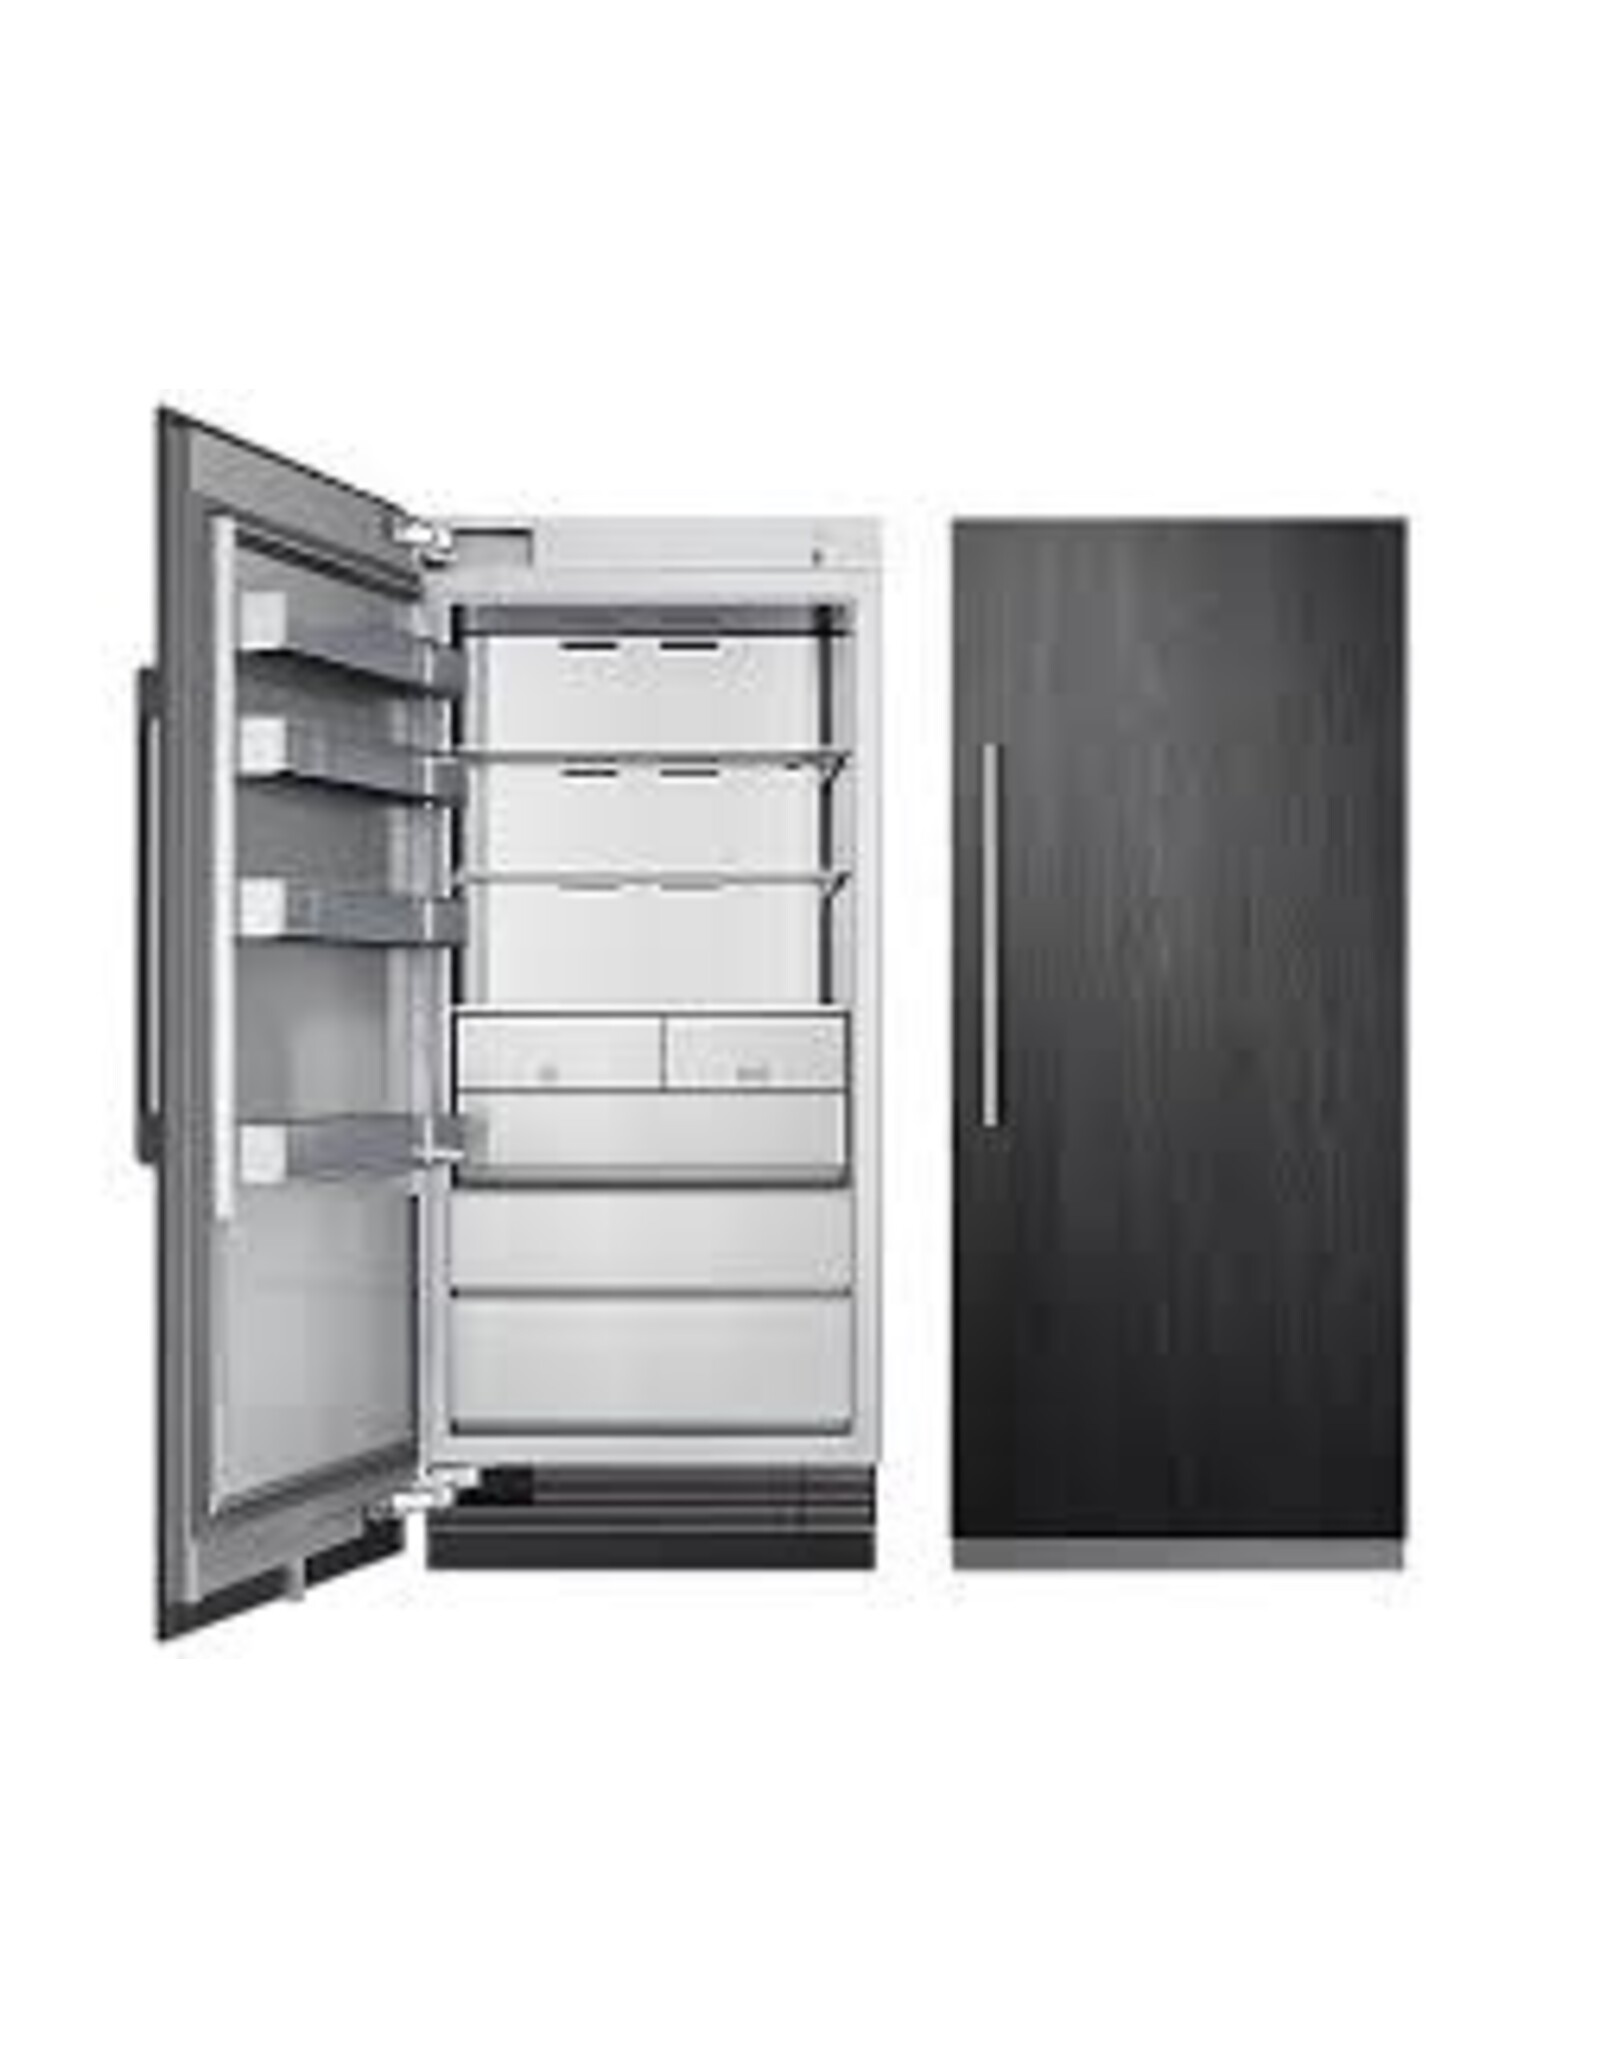 Dacor DRZ36980LAP 36 Inch Panel Ready Freezer Column with 21.4 Cu. Ft Capacity, Push-to-Open™ Door Assist, SteelCool™ Interior, Dual Ice Makers, Power Freeze, Tempered Spill-Proof Shelving, IQ Remote Diagnostics™ and ENERGY STAR®: Left Hinge